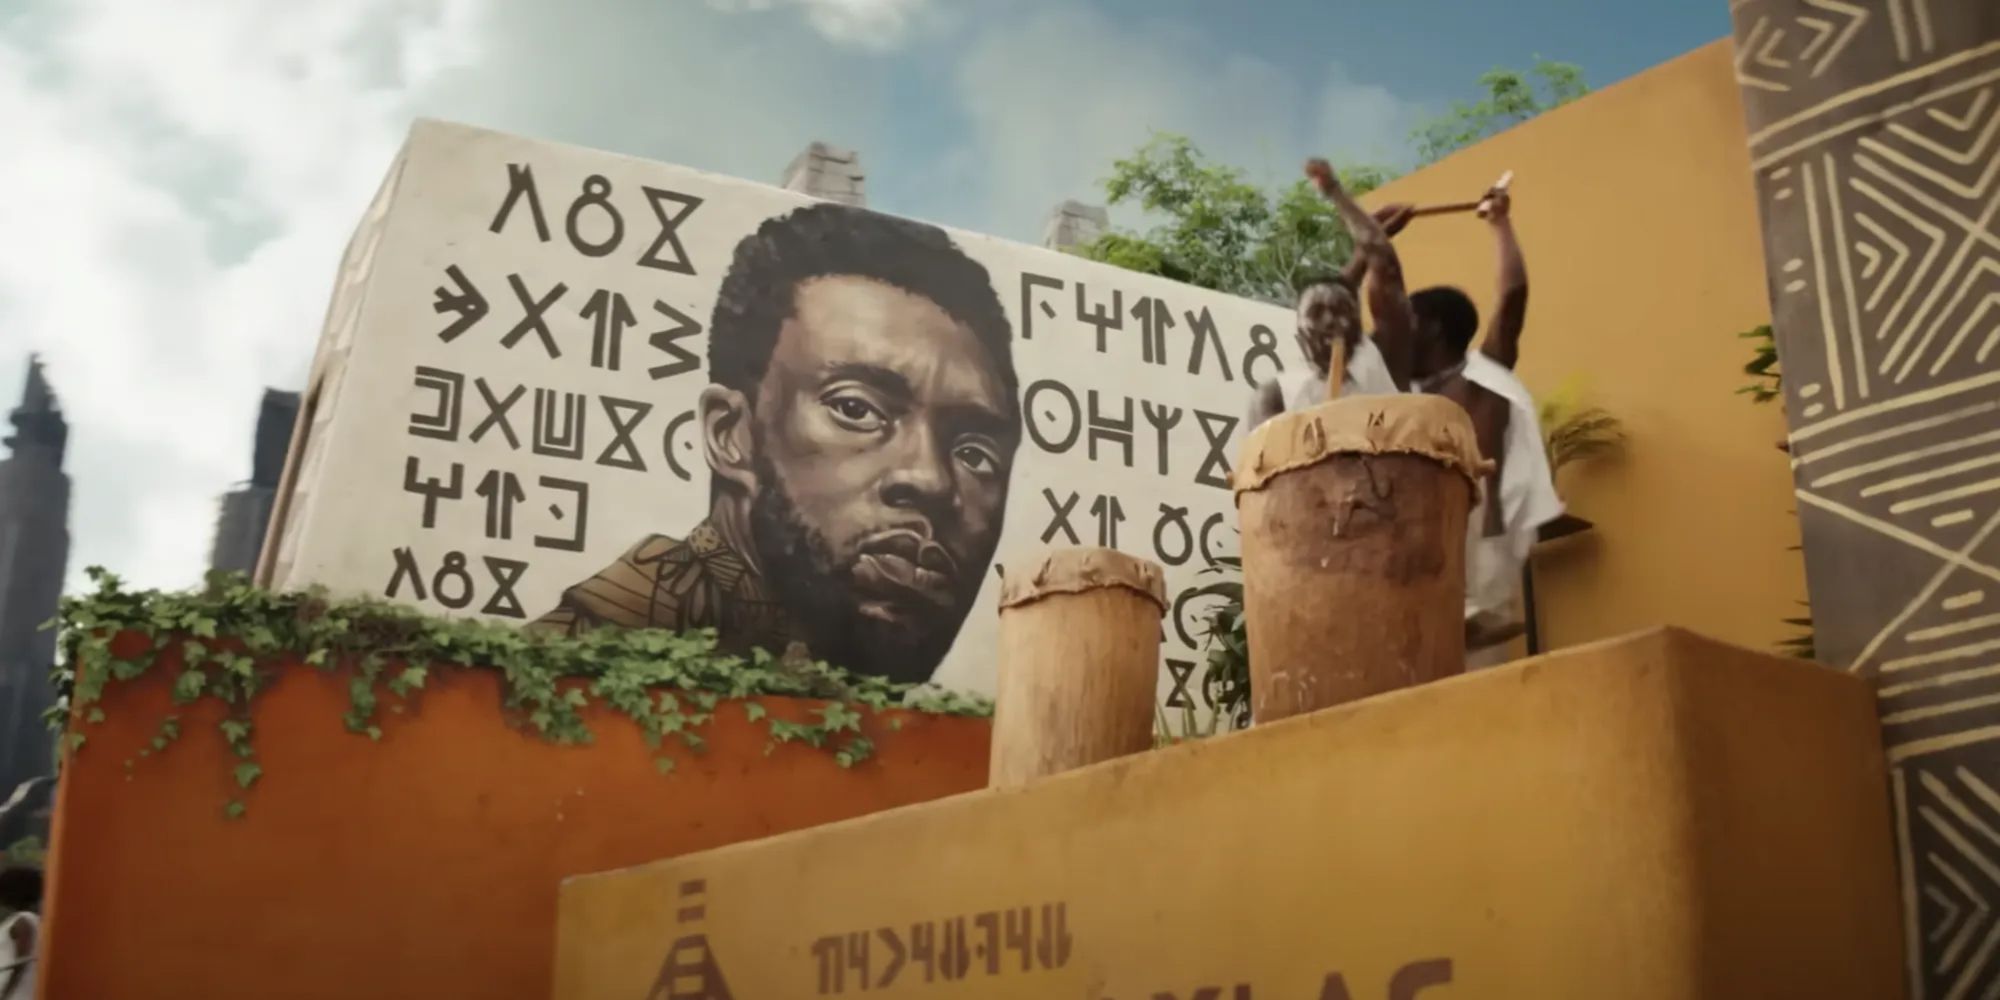 A mural pays tribute to T'Challa in Black Panther: Wakanda Forever.